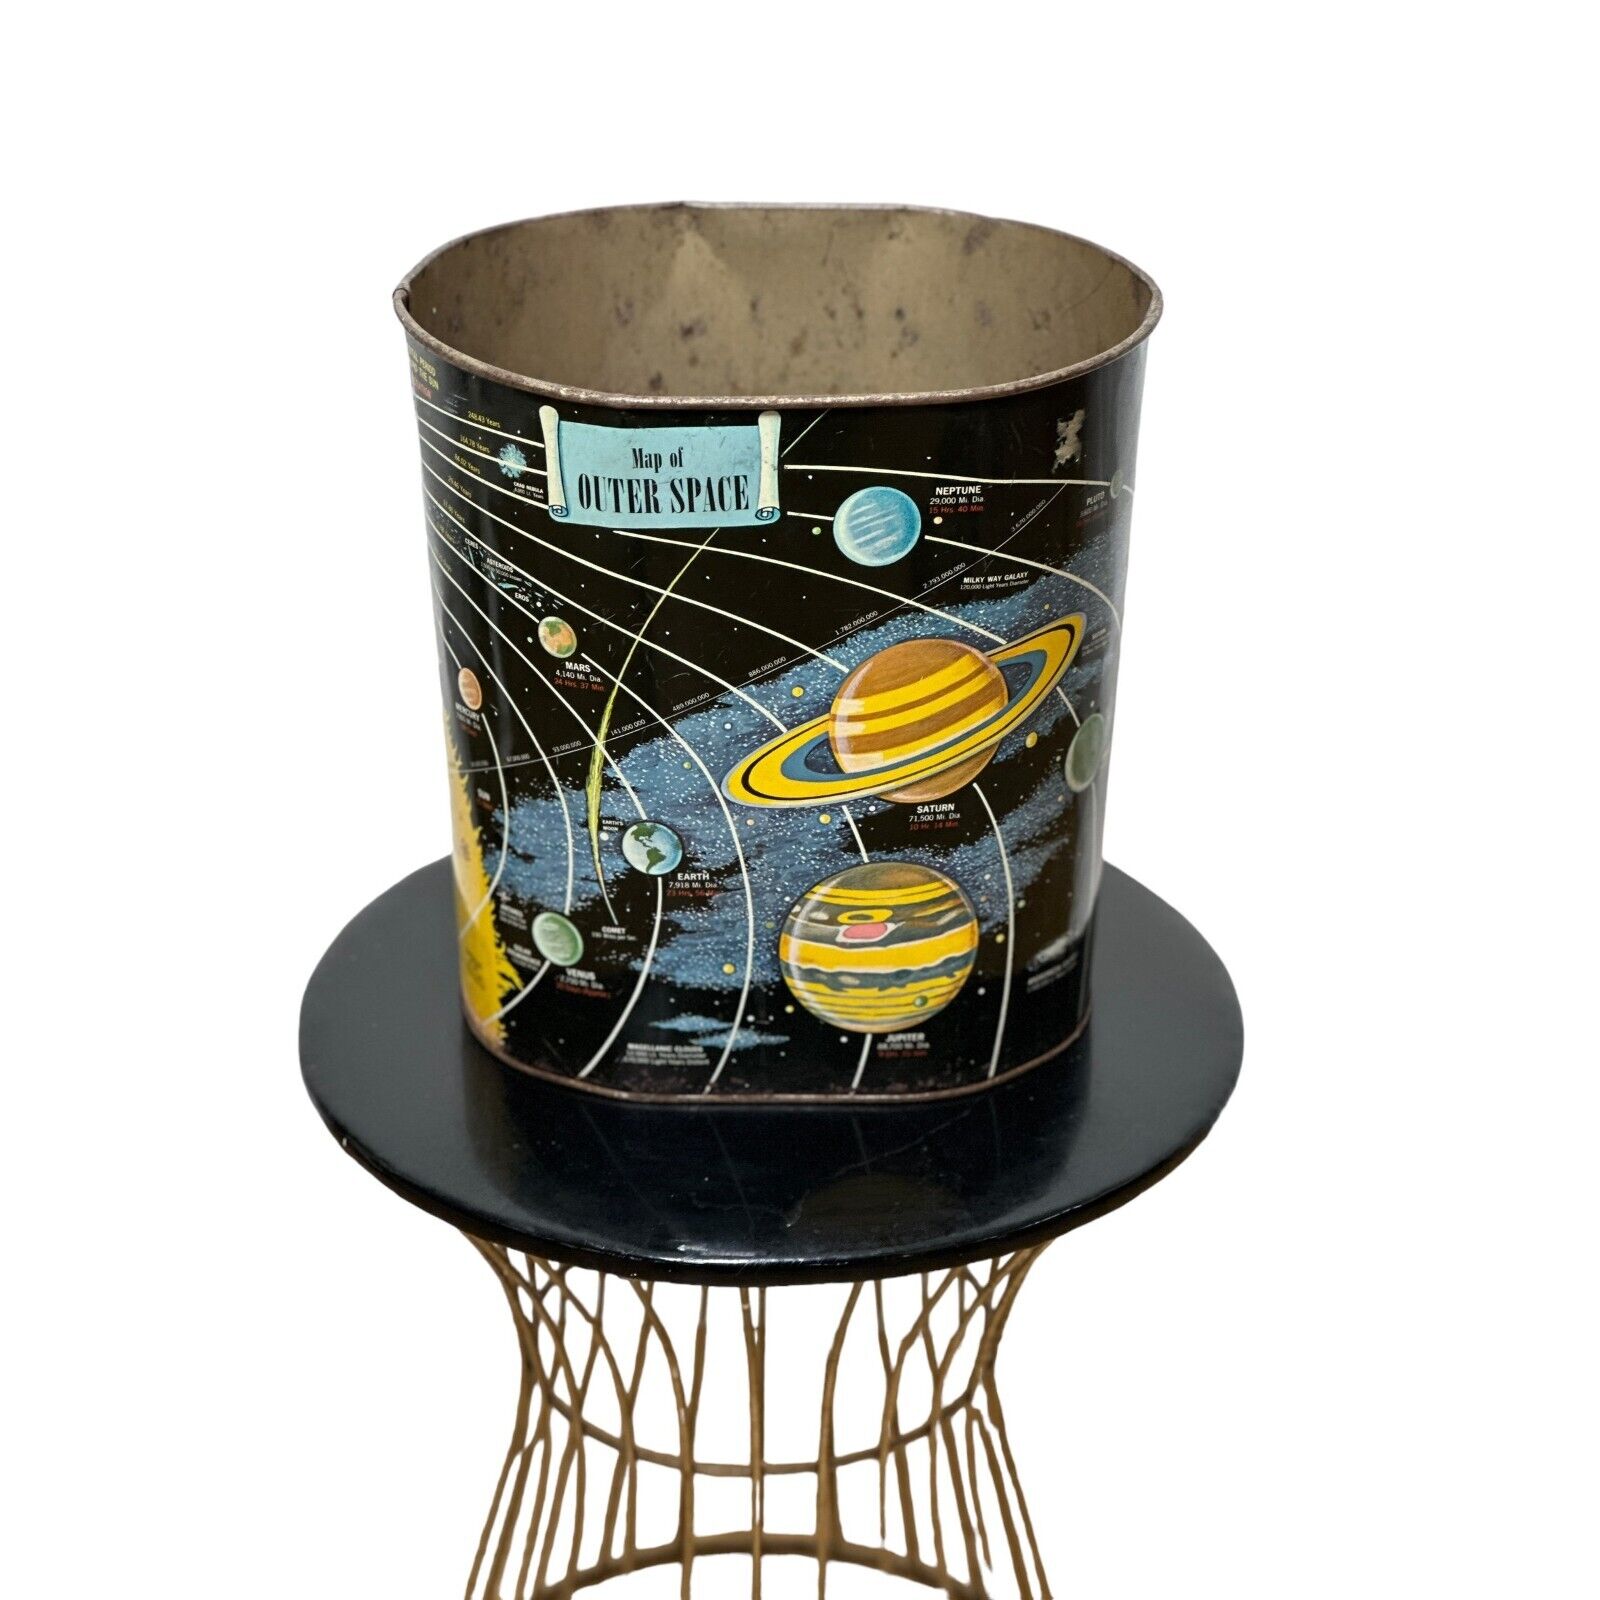 Vintage 60s Decoware outer space trash can with planets